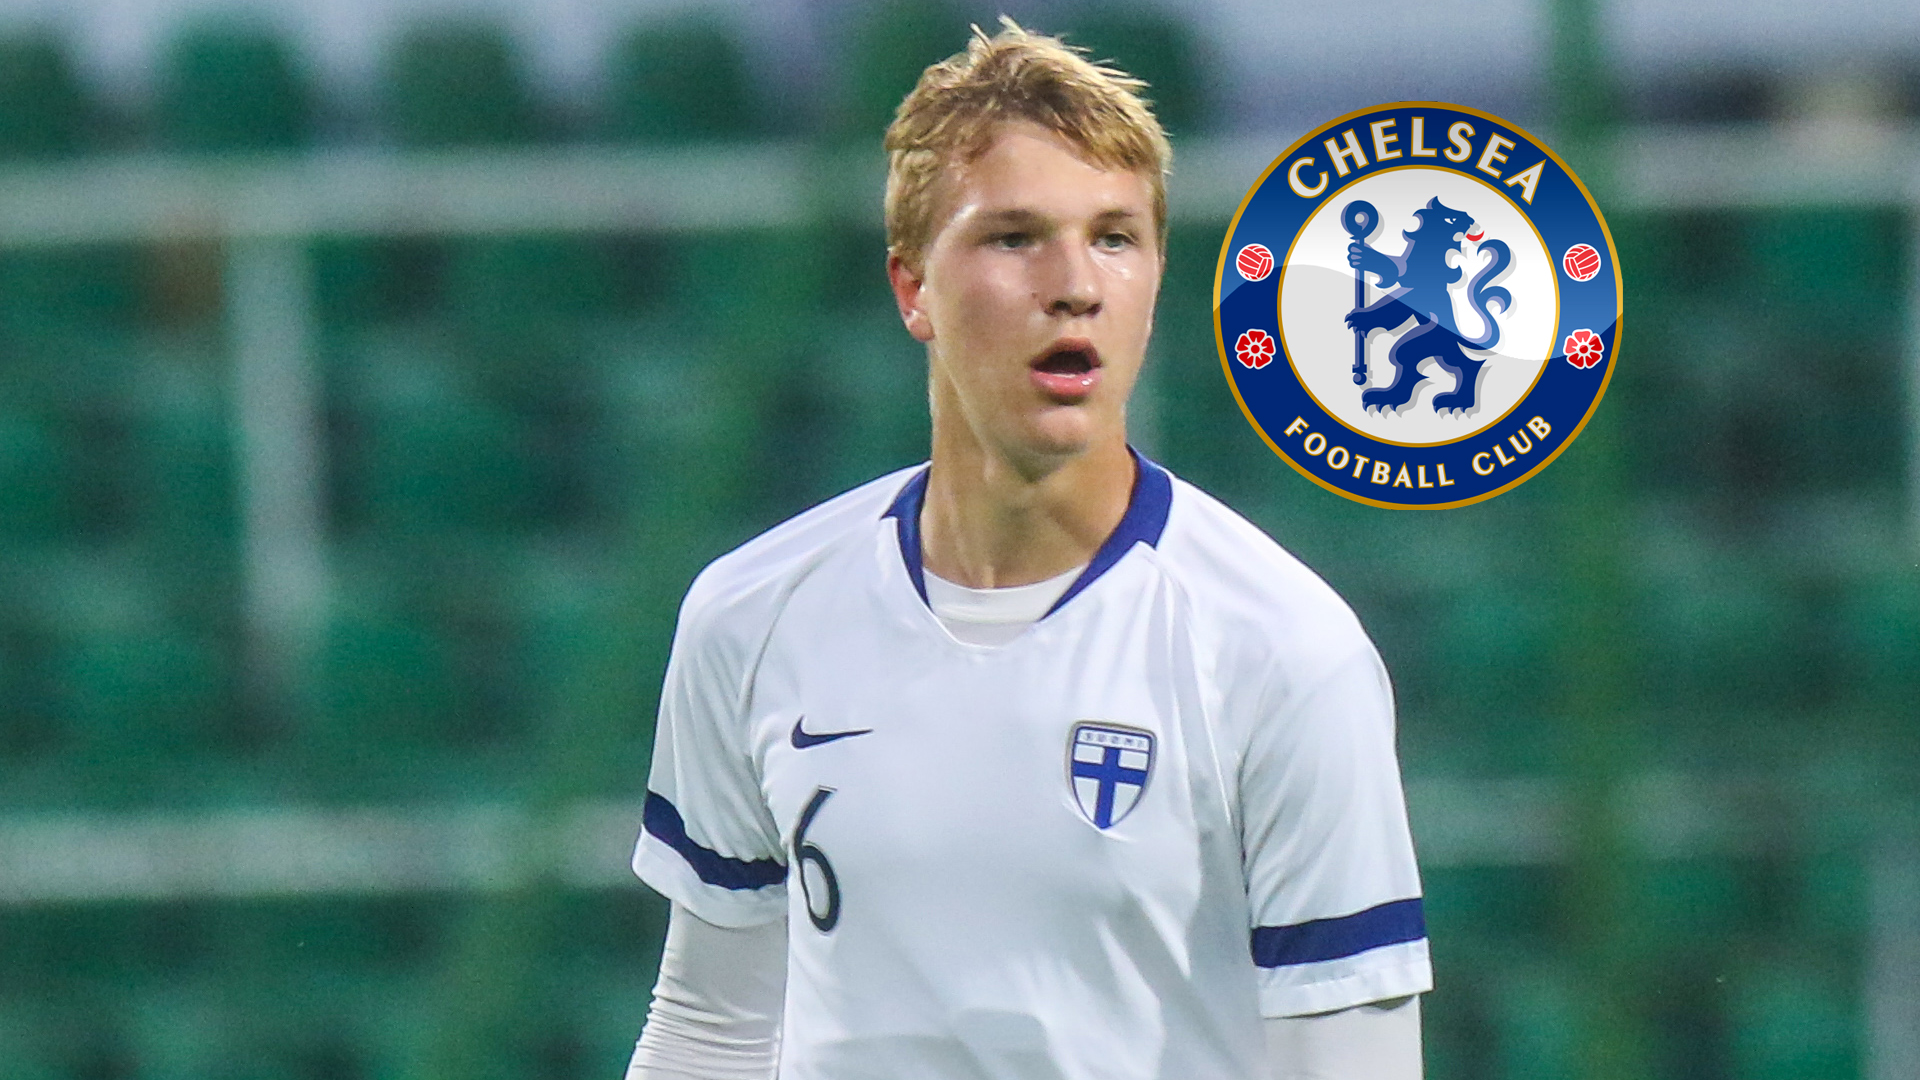 Chelsea Transfer News: The Blues Want To Sign Luka Hyrylainen